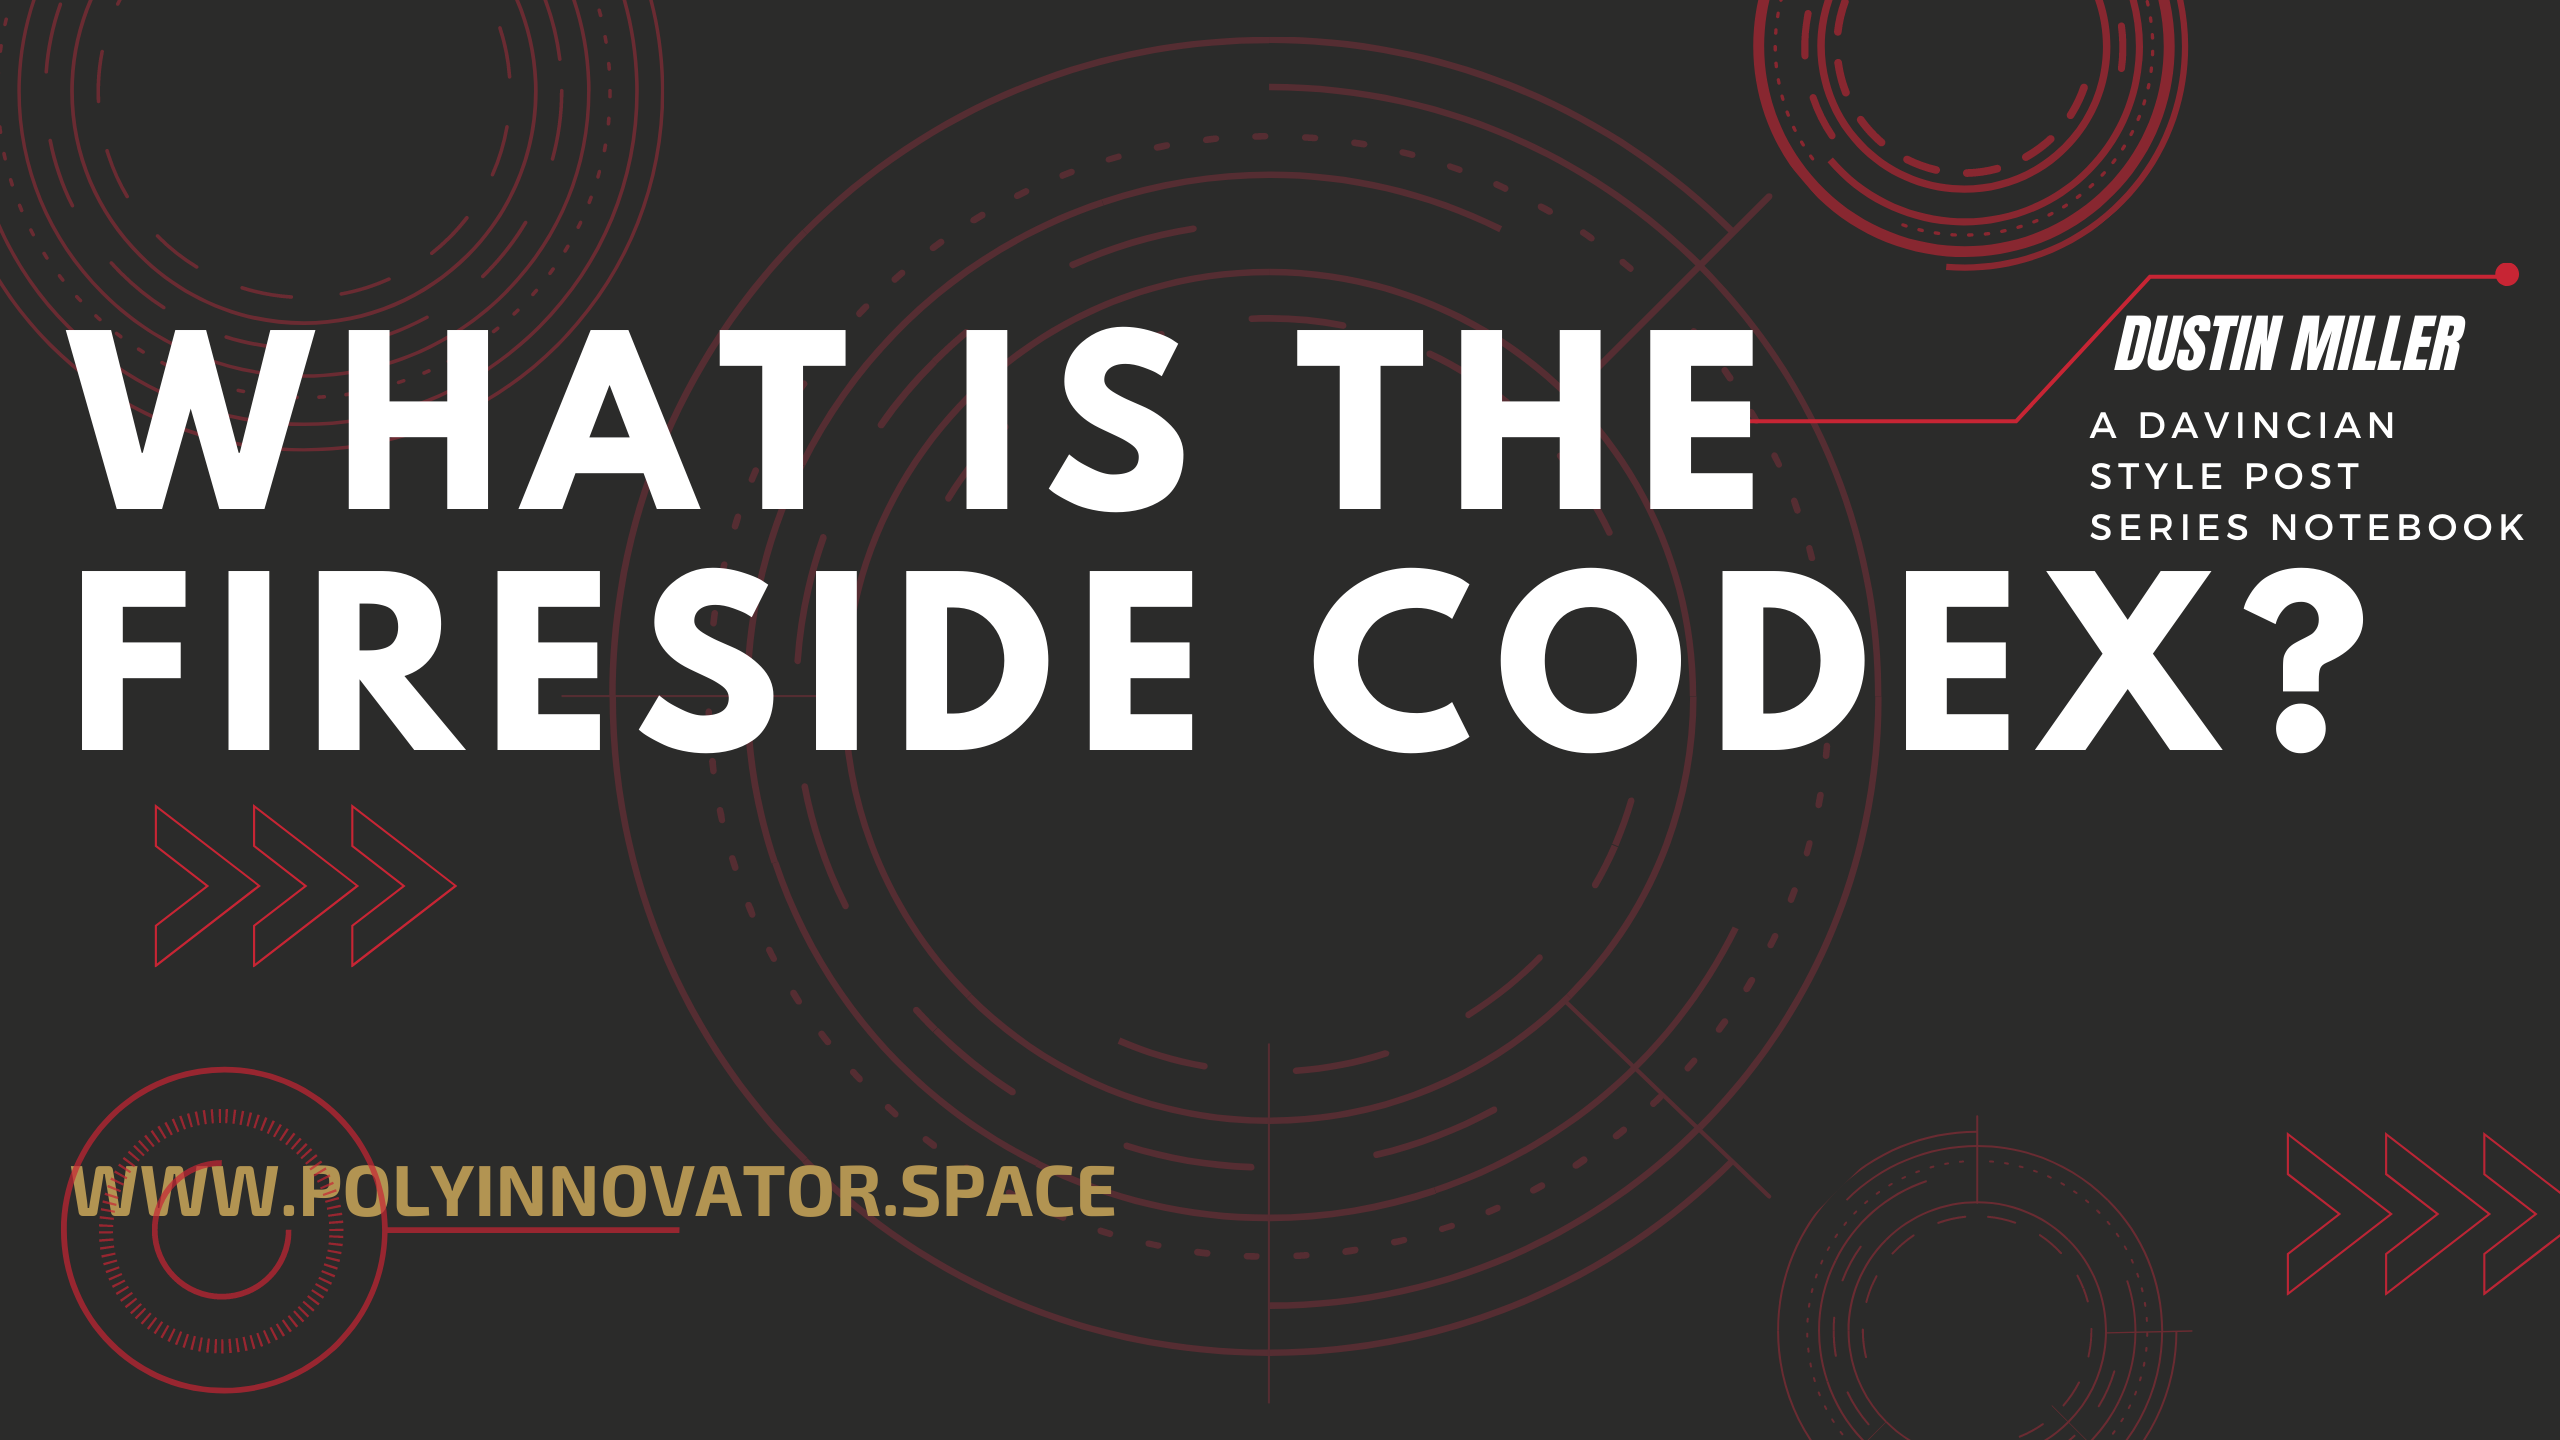 What is the Fireside Codex?